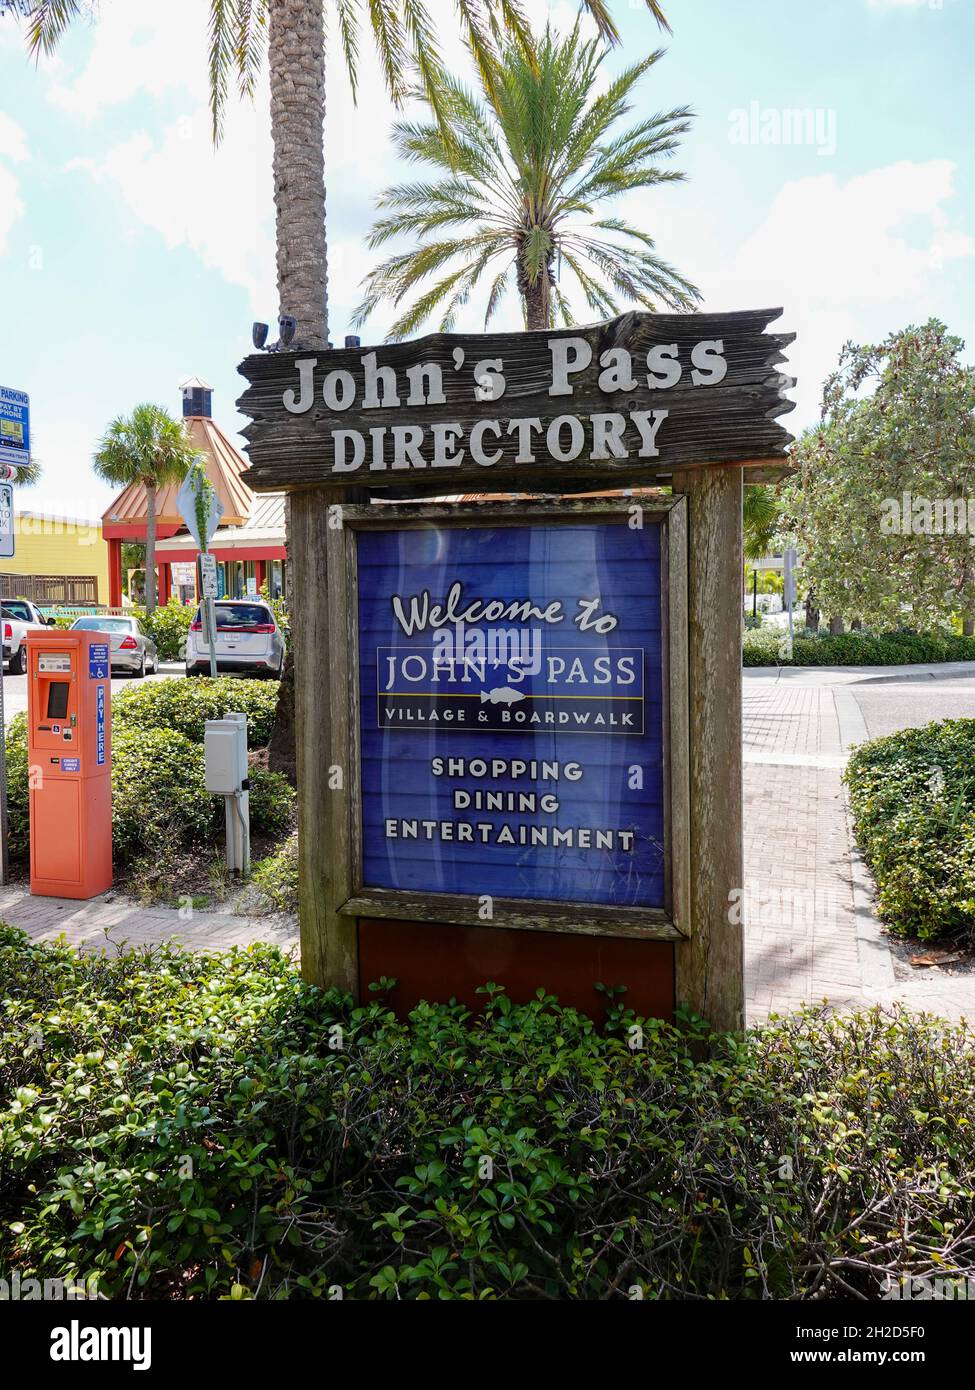 John’s Pass Village and Boardwalk directory sign, resort and shopping area in Madeira Beach, Florida, USA. Stock Photo